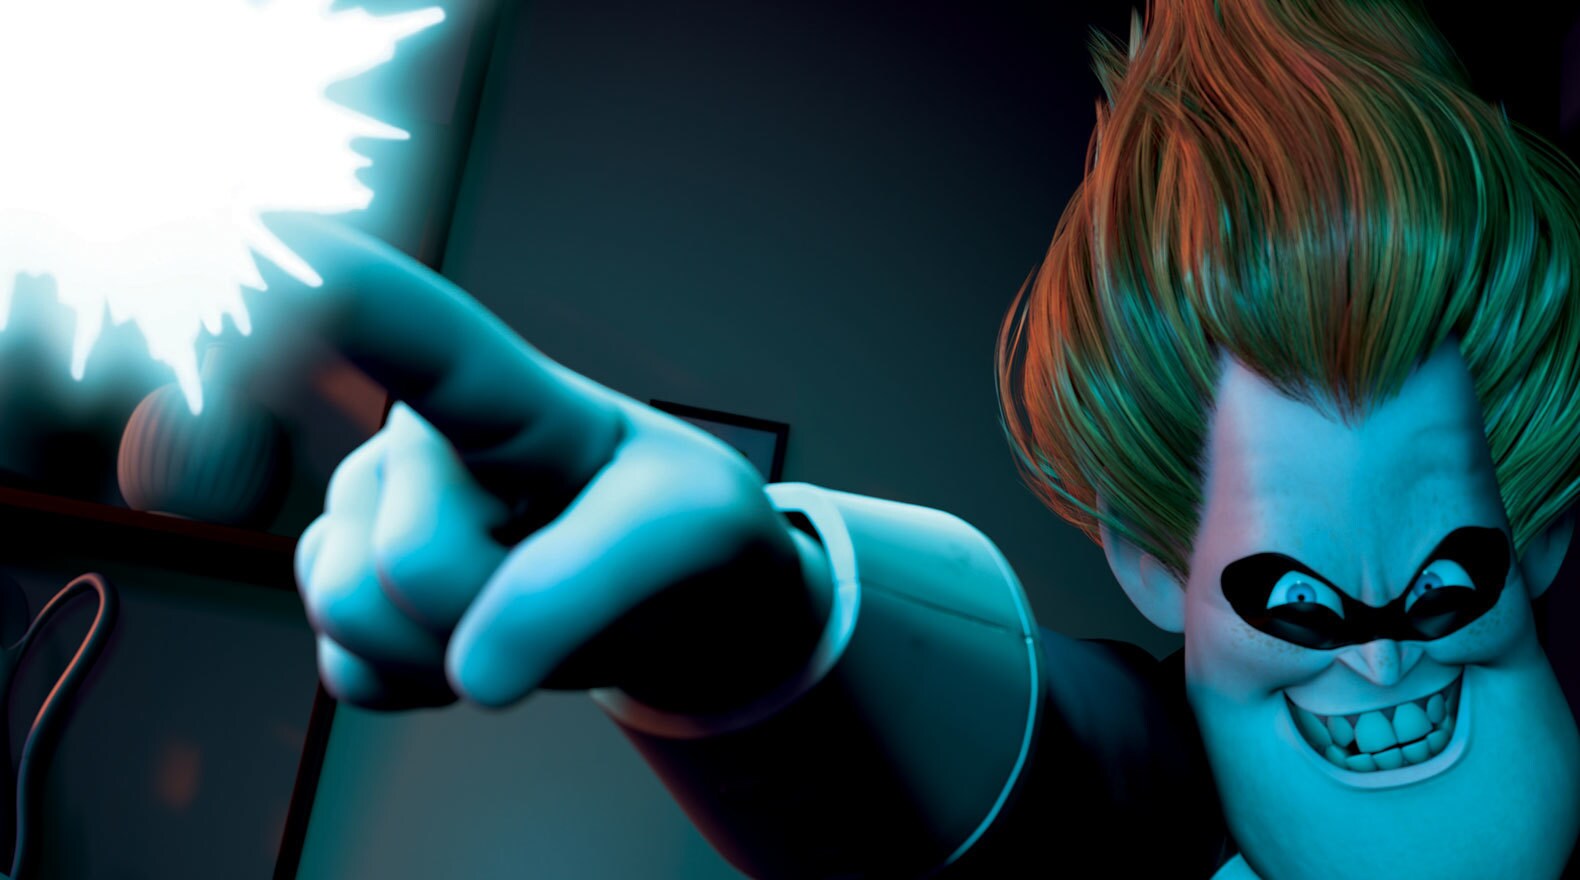 Syndrome - this number one fan takes being a super into his own hands in "The Incredibles"